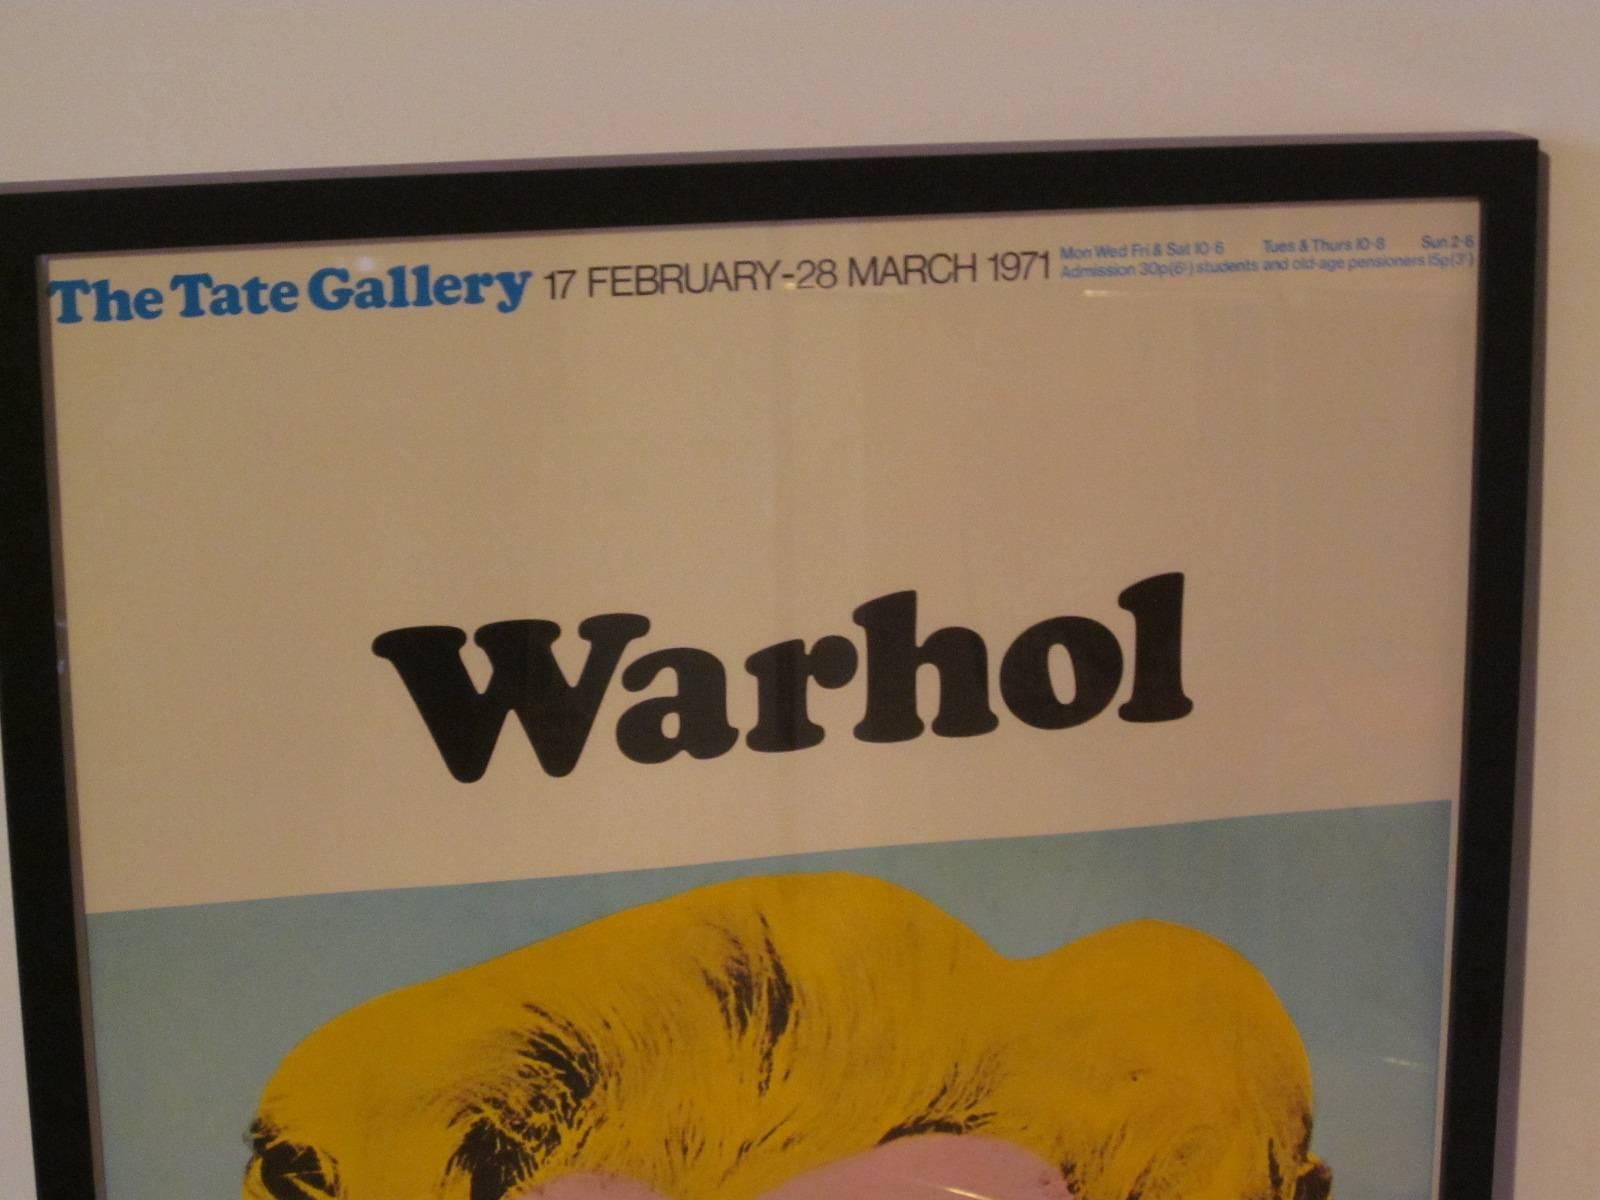 A Marilyn Monroe poster for an Andy Warhol exhibit 17 February thru 28 March 1971 from the Tate Gallery in London. This is a poster from the original period exhibit and is in a satin black frame with UV glass marked to the lower right side and